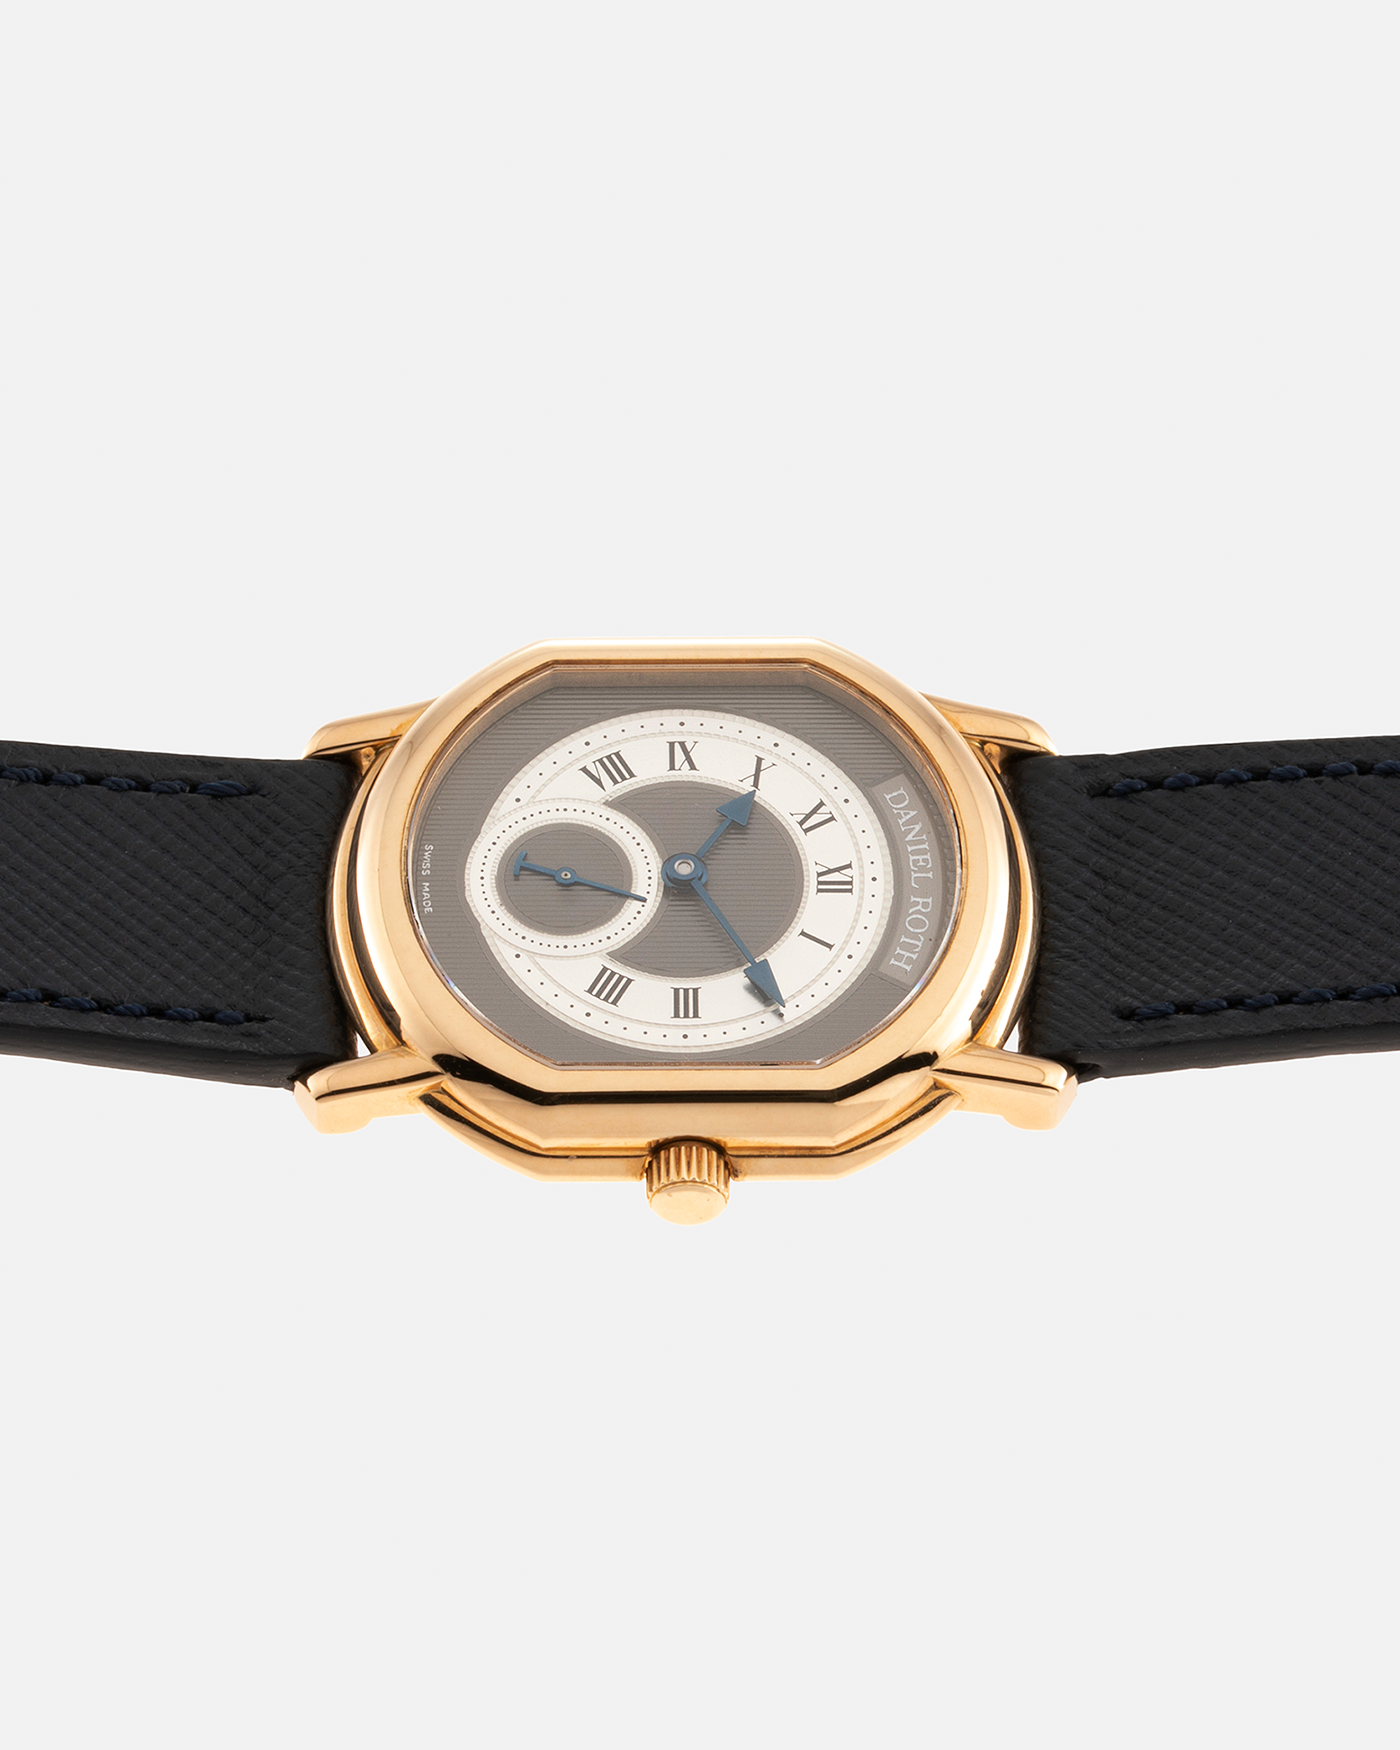 Brand: Daniel Roth Year: 1990’s Model: Seconds at Six, Mid-Size Material: 18-carat Yellow Gold  Movement: Lemania Cal. 1918, Self-Winding Case Dimensions: 35mm x 32mm Lug Width: 18mm Strap: Molequin Navy Textured Calf Leather Strap with Generic Stainless Steel Tang Buckle